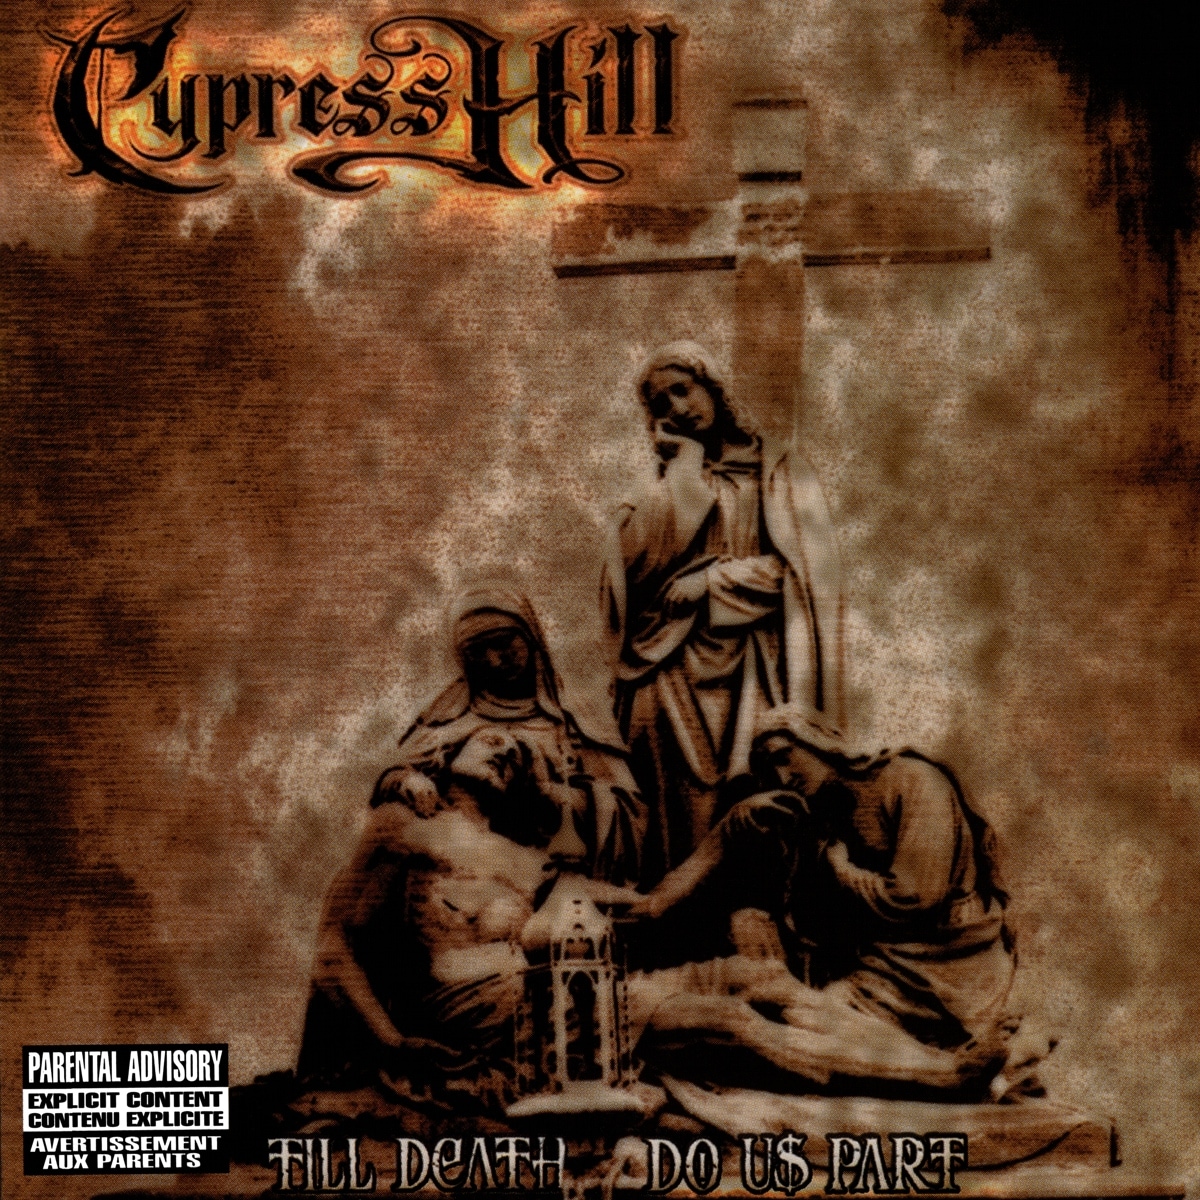 Cypress hill discography blogspot password download free